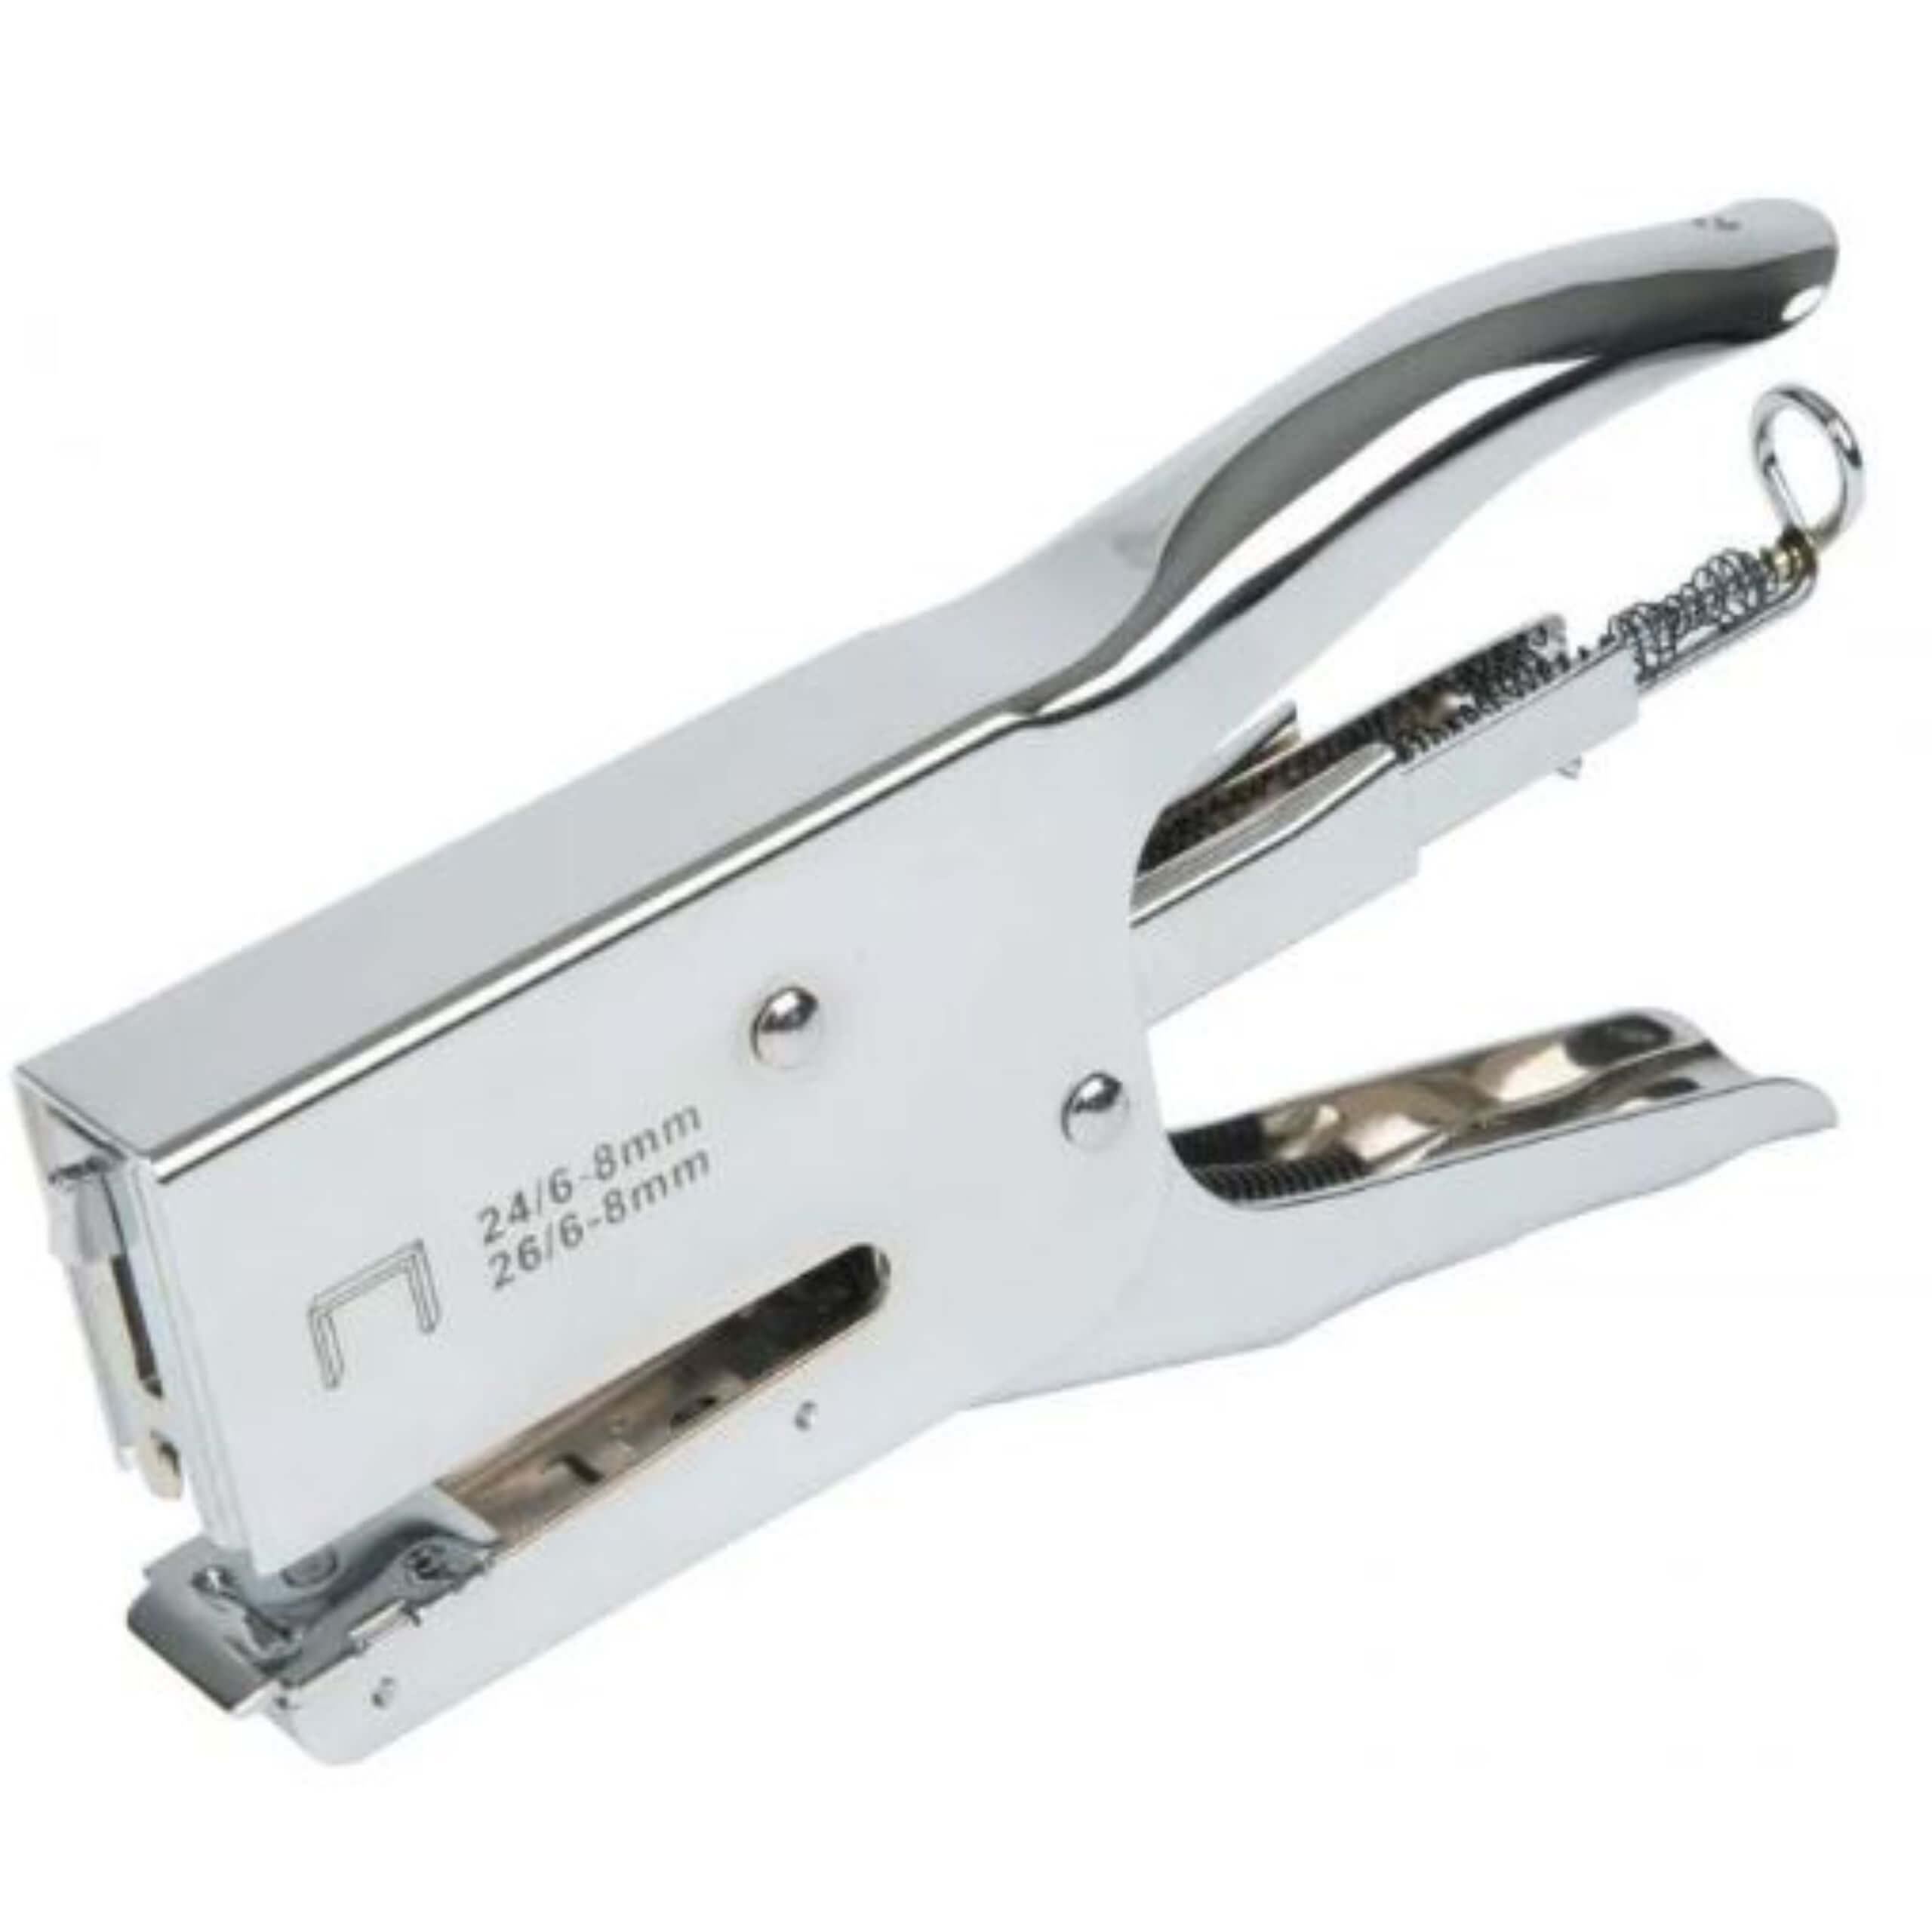 An image of one of our Carton Staplers.